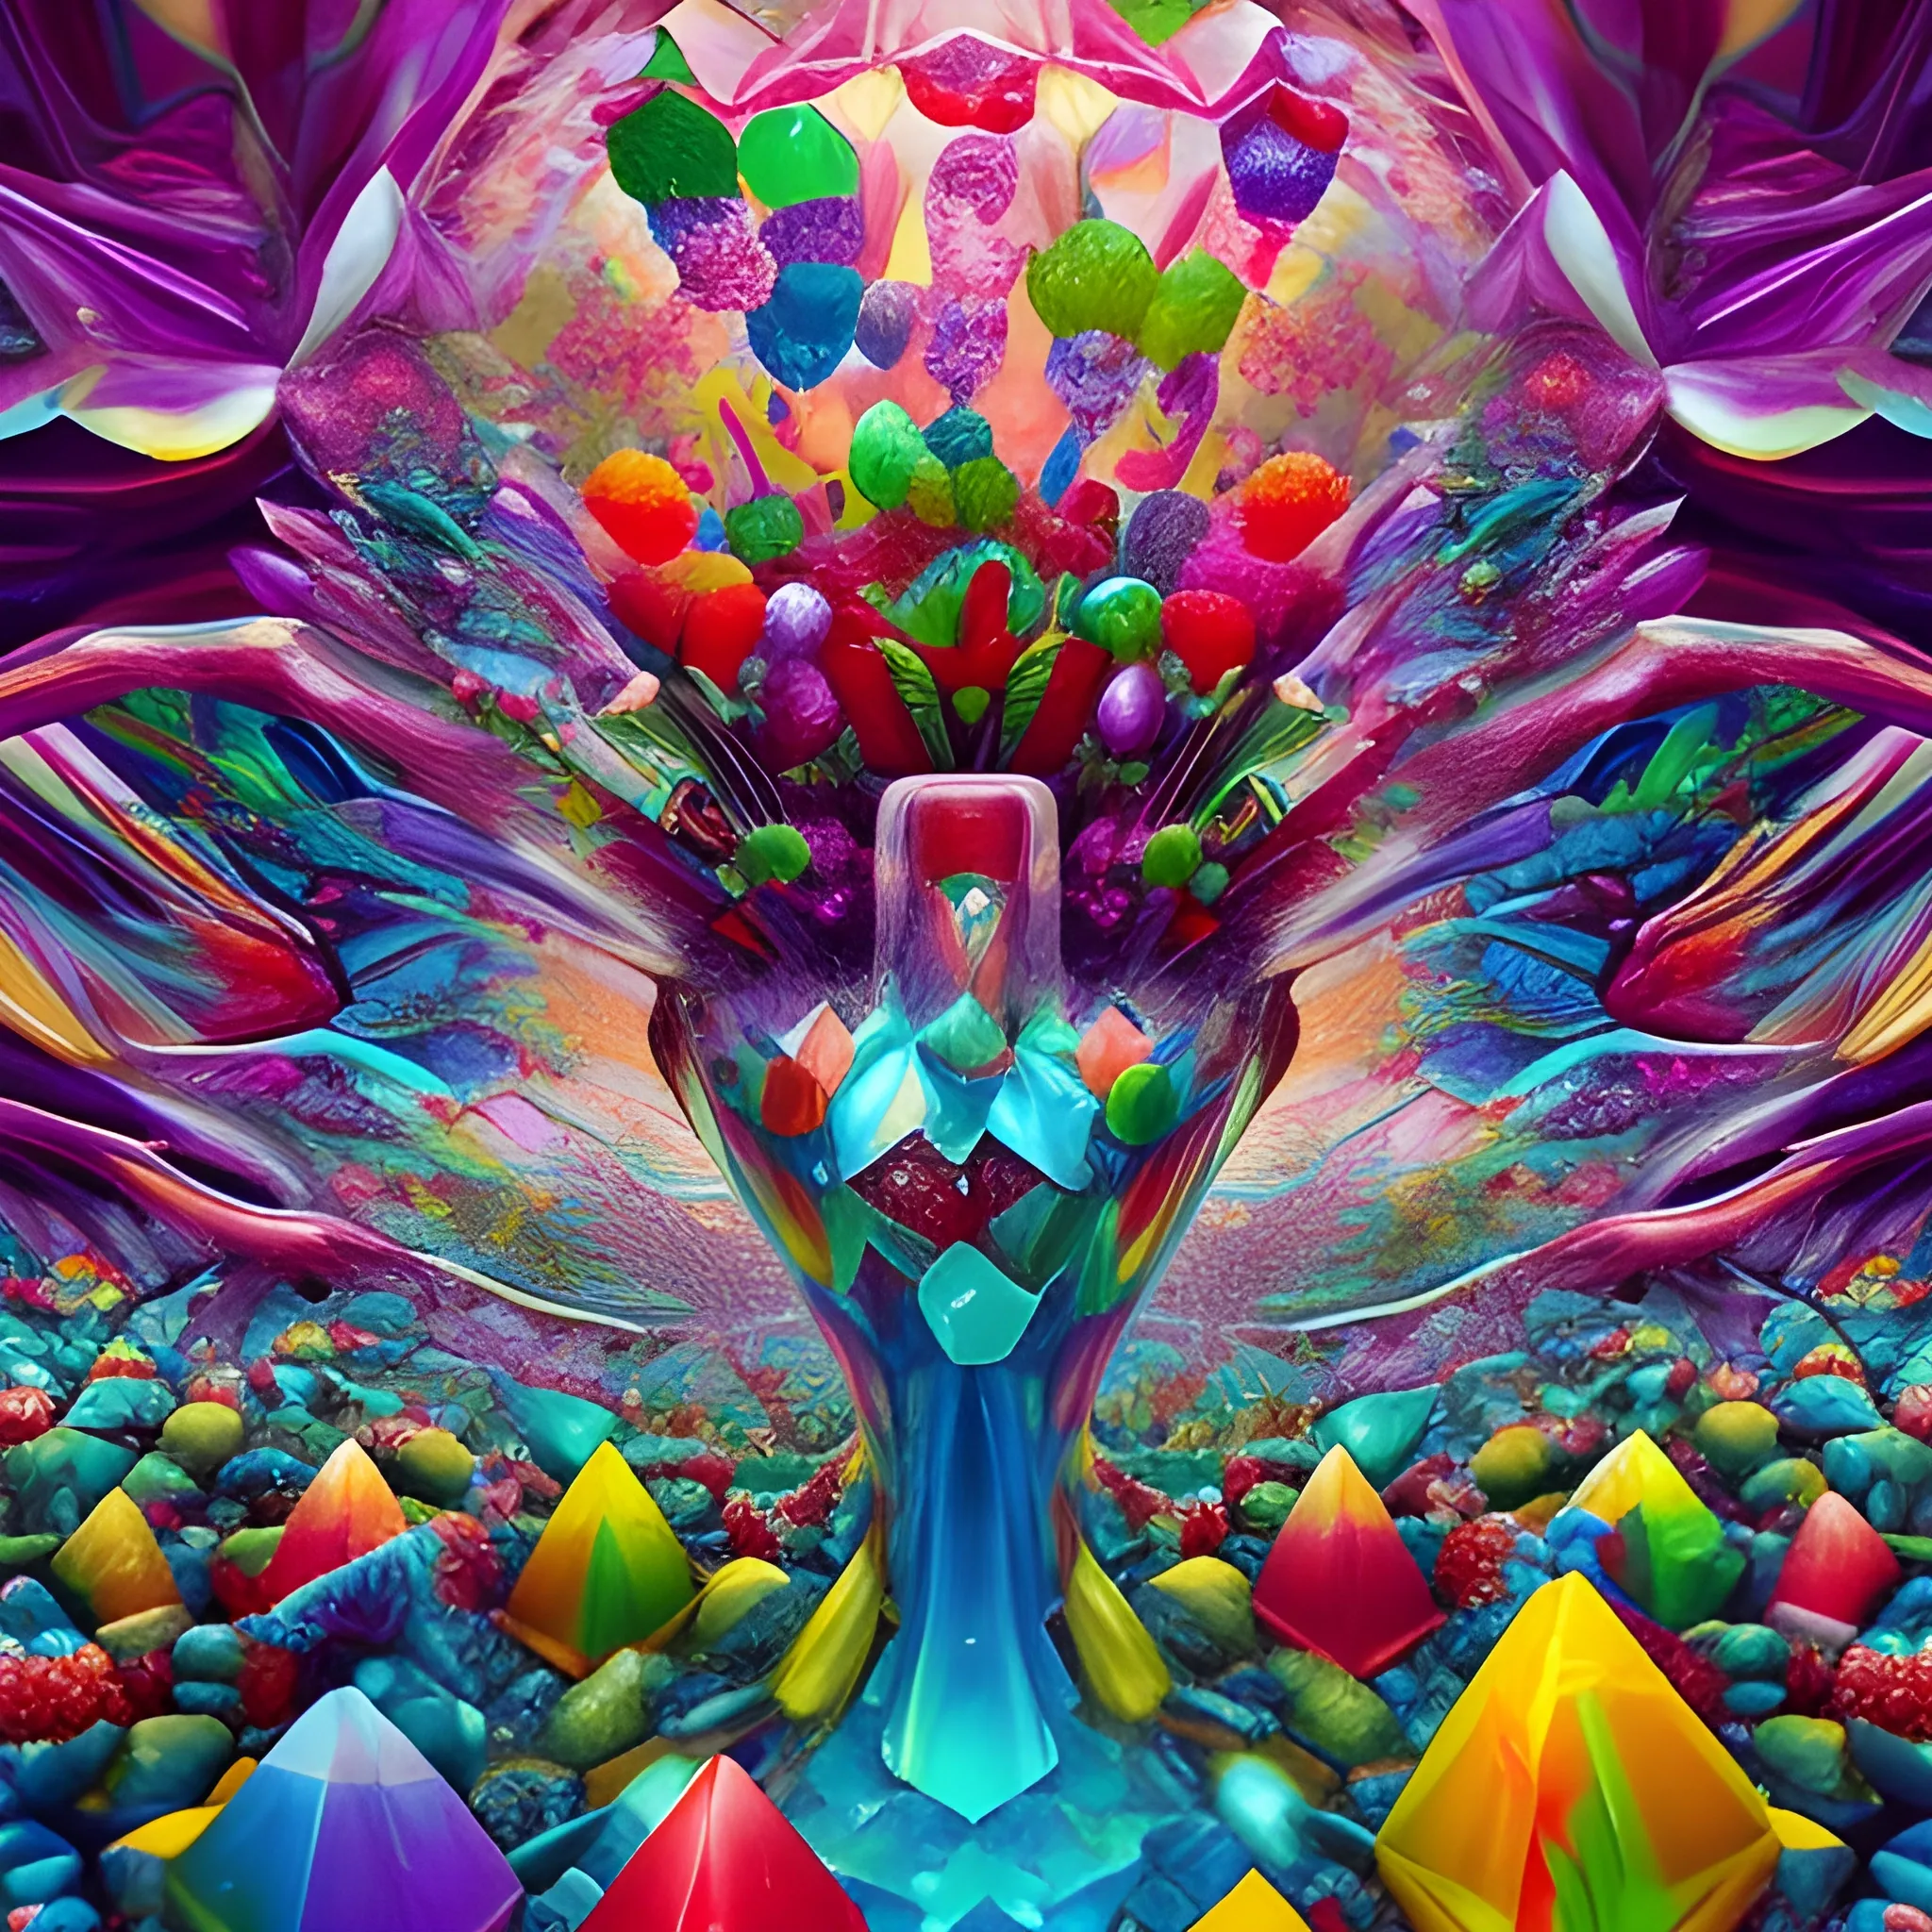 many crystal crazy raspberries with human face, crystal birds of paradise and  parrots around, many ice cubes  in the air, many plans of Amazon Rainforest, saturated colors, surrealism, chaotic background, 3D, Trippy,  eerie atmosphere, close up, Oil Painting, wide dynamic range, wide-angle view  